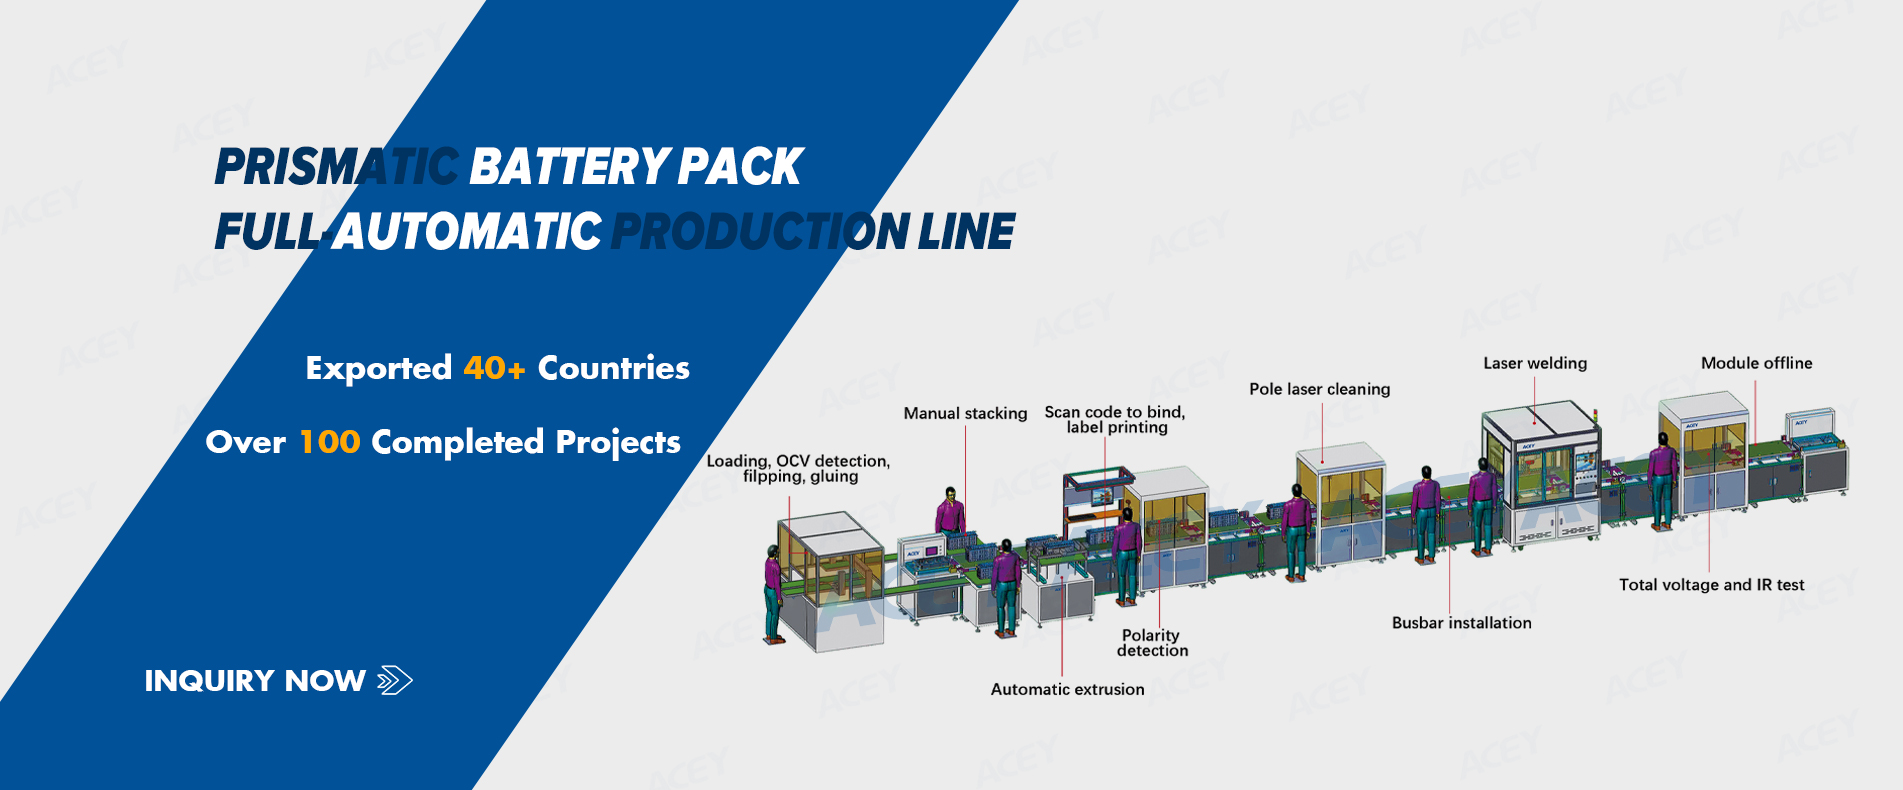 Prismatic battery pack full-automatic production line